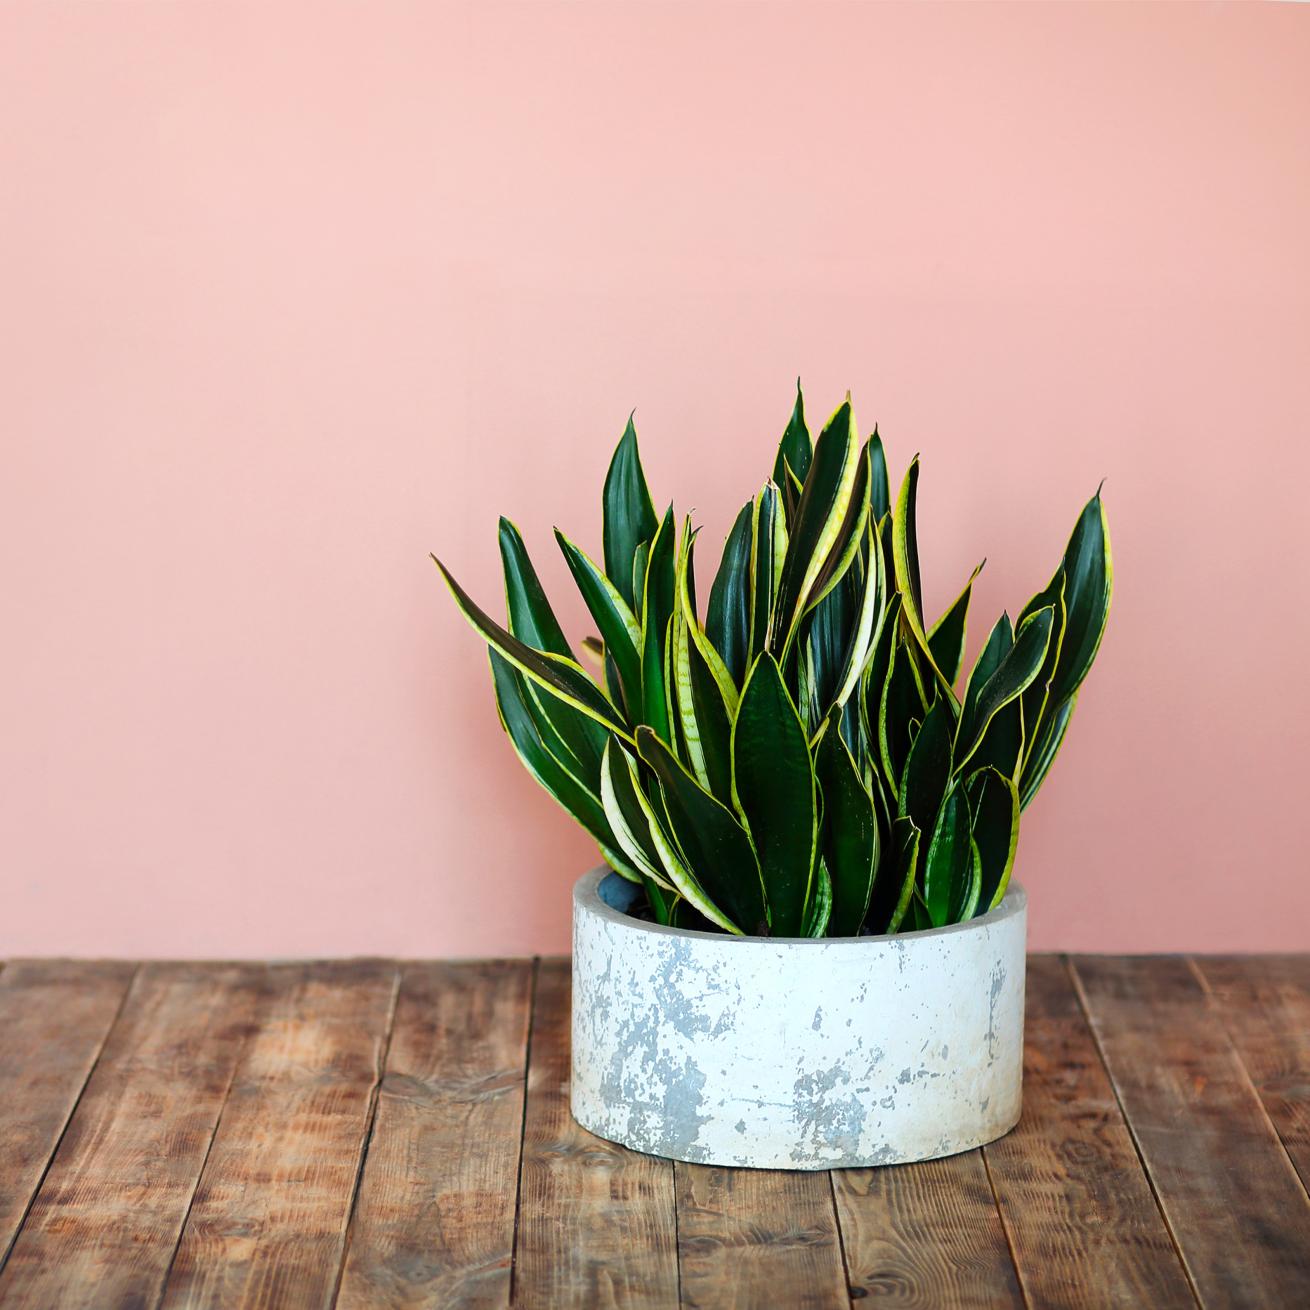 A snake plant in a grey and white pot on a wooden floor in front of a pink wall